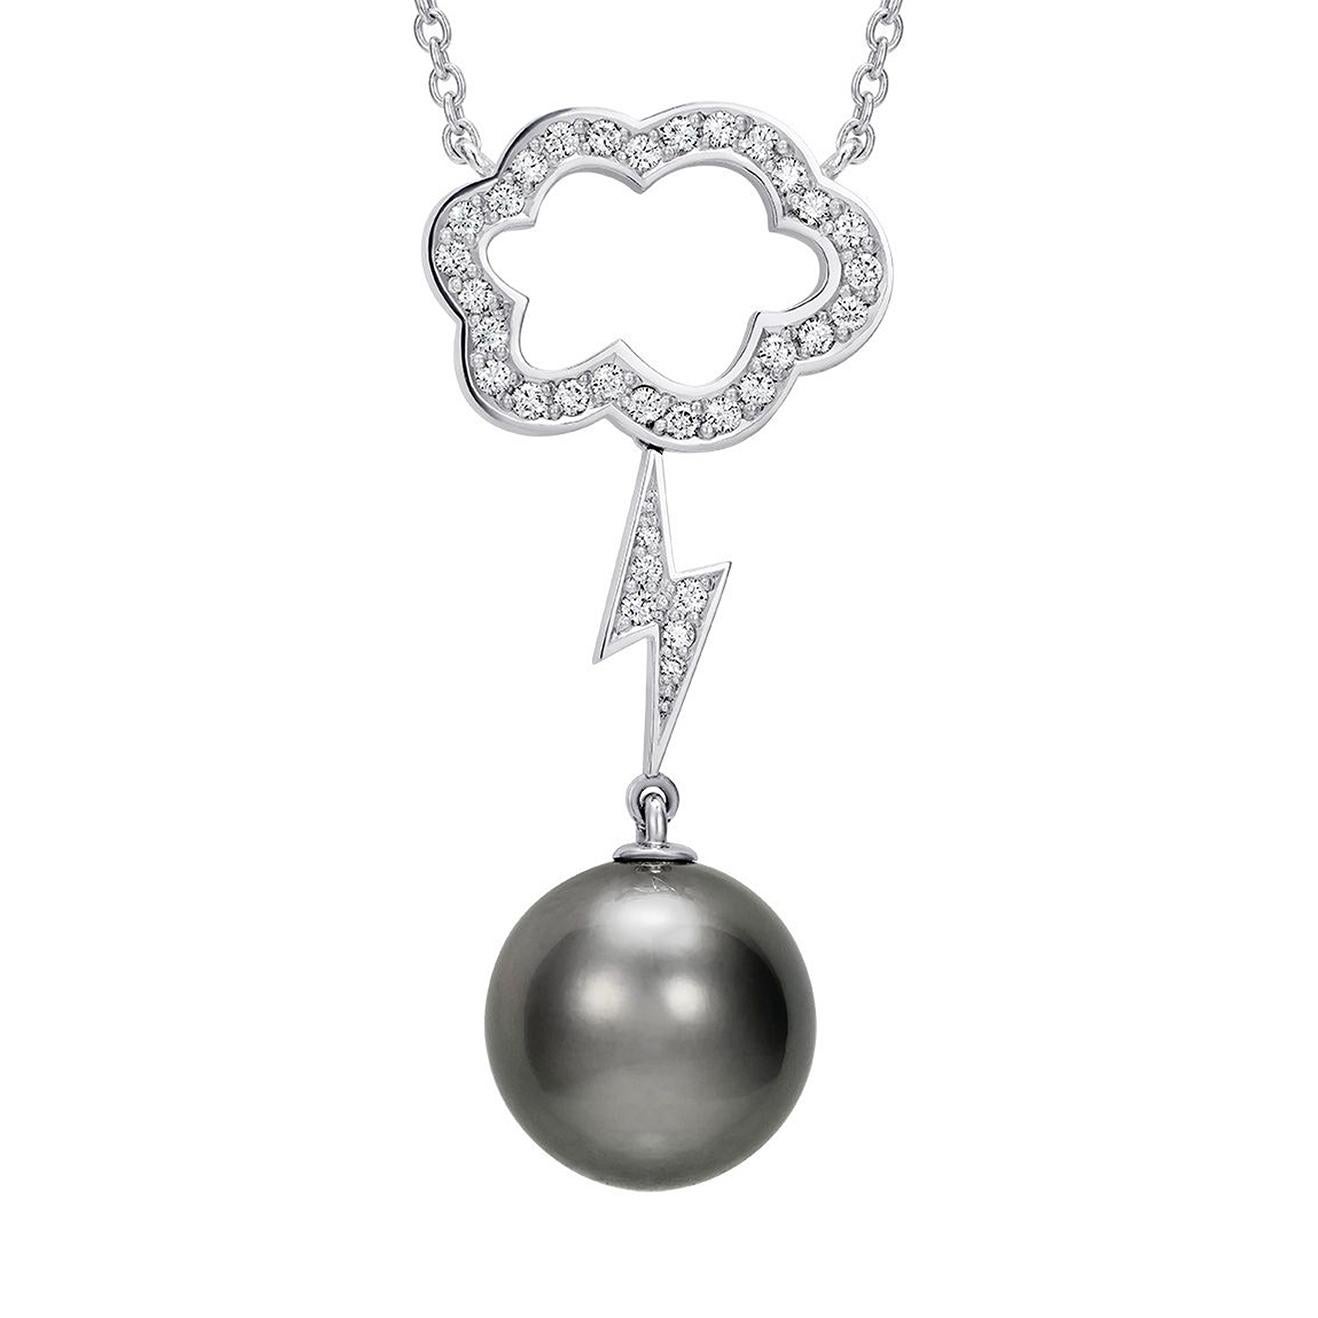 A new addition to our Cloud 9 collection, inspired by life in London where every cloud has a diamond lining. This beautiful pendant features a sparkling diamond lightning bolt set above a Tahitian pearl.

- 1 Tahitian pearl weighing approx 10.50